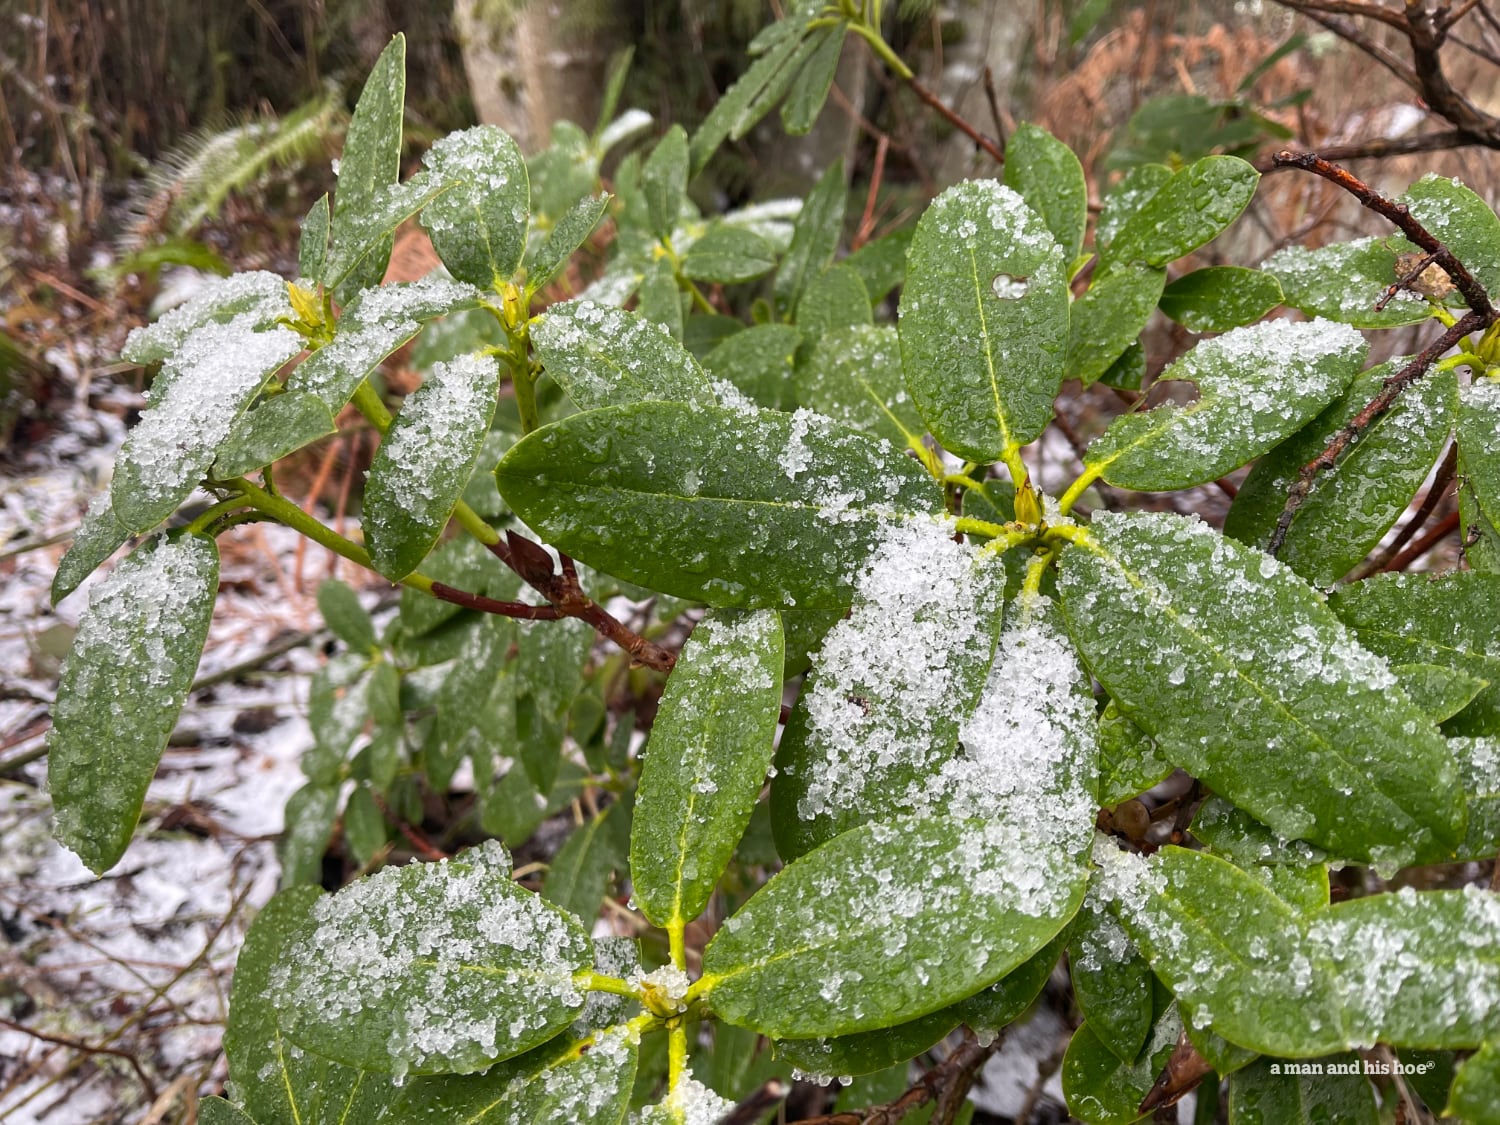 Snow on rhododendrons